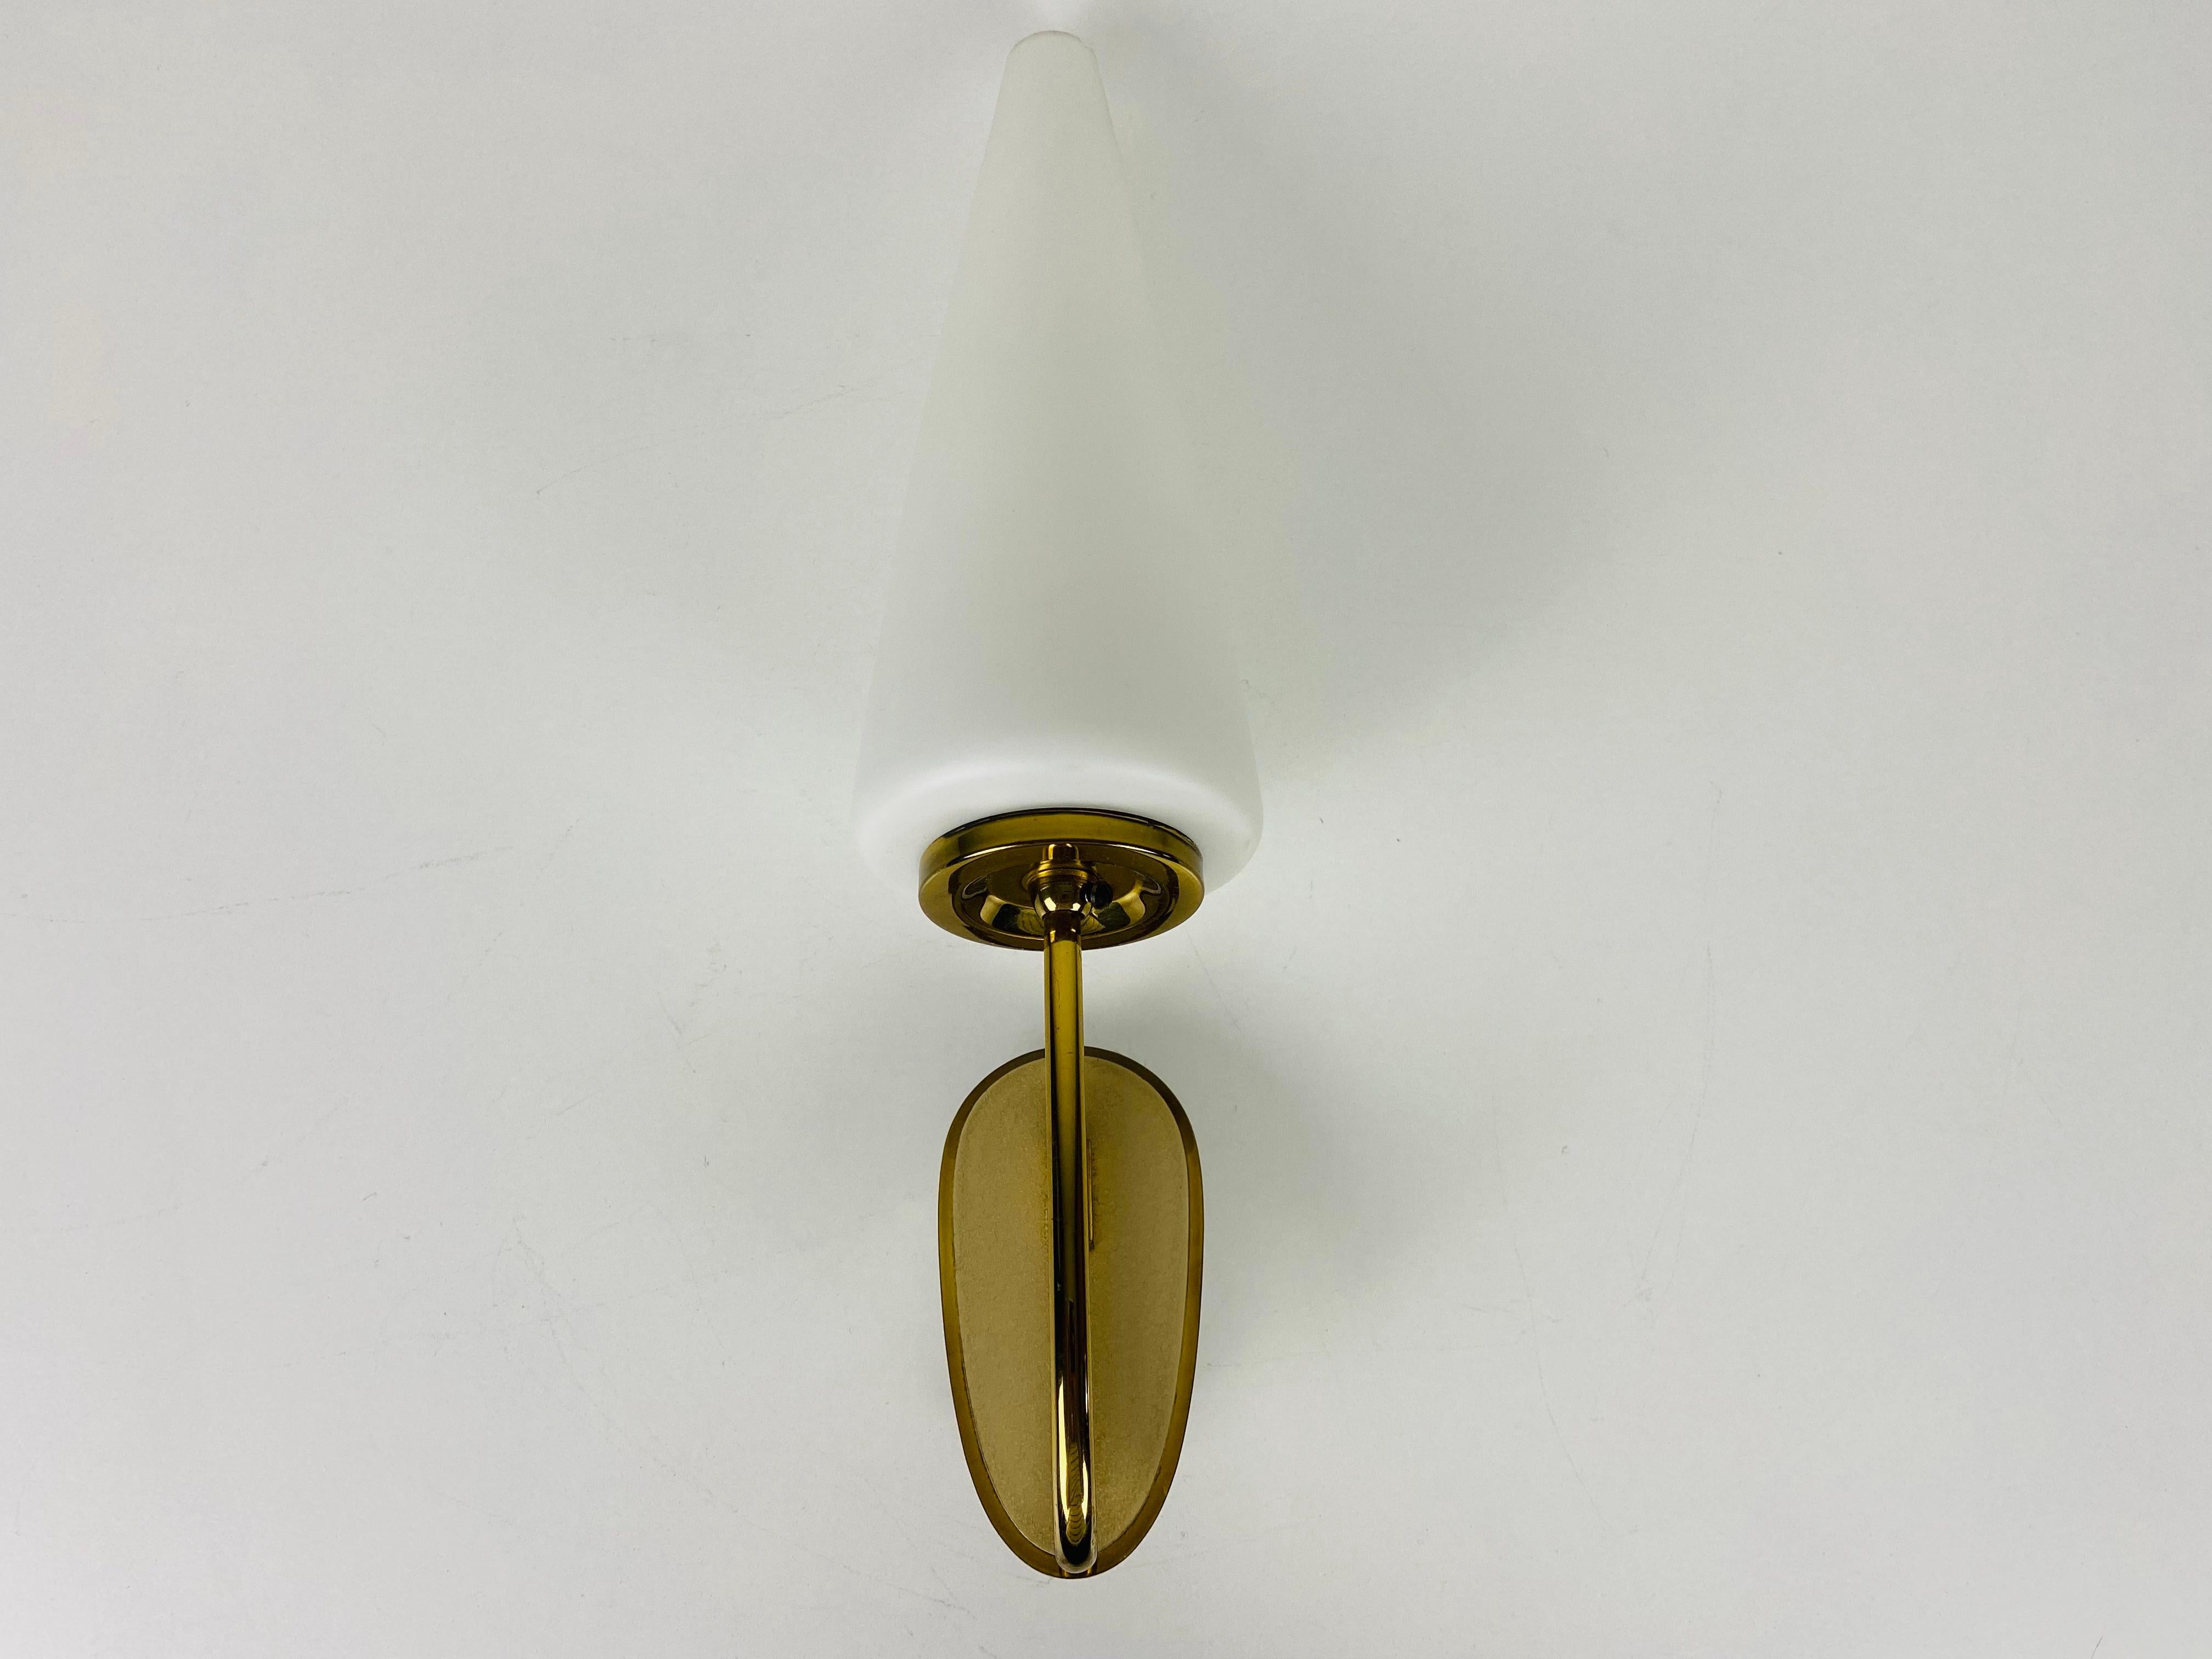 Very rare wall lamp made in the style of Maison Lunel from the 1950s. The light has brass body with an opaline glass.

The light requires an E14 light bulb. Very good vintage condition.

Free worldwide express shipping.